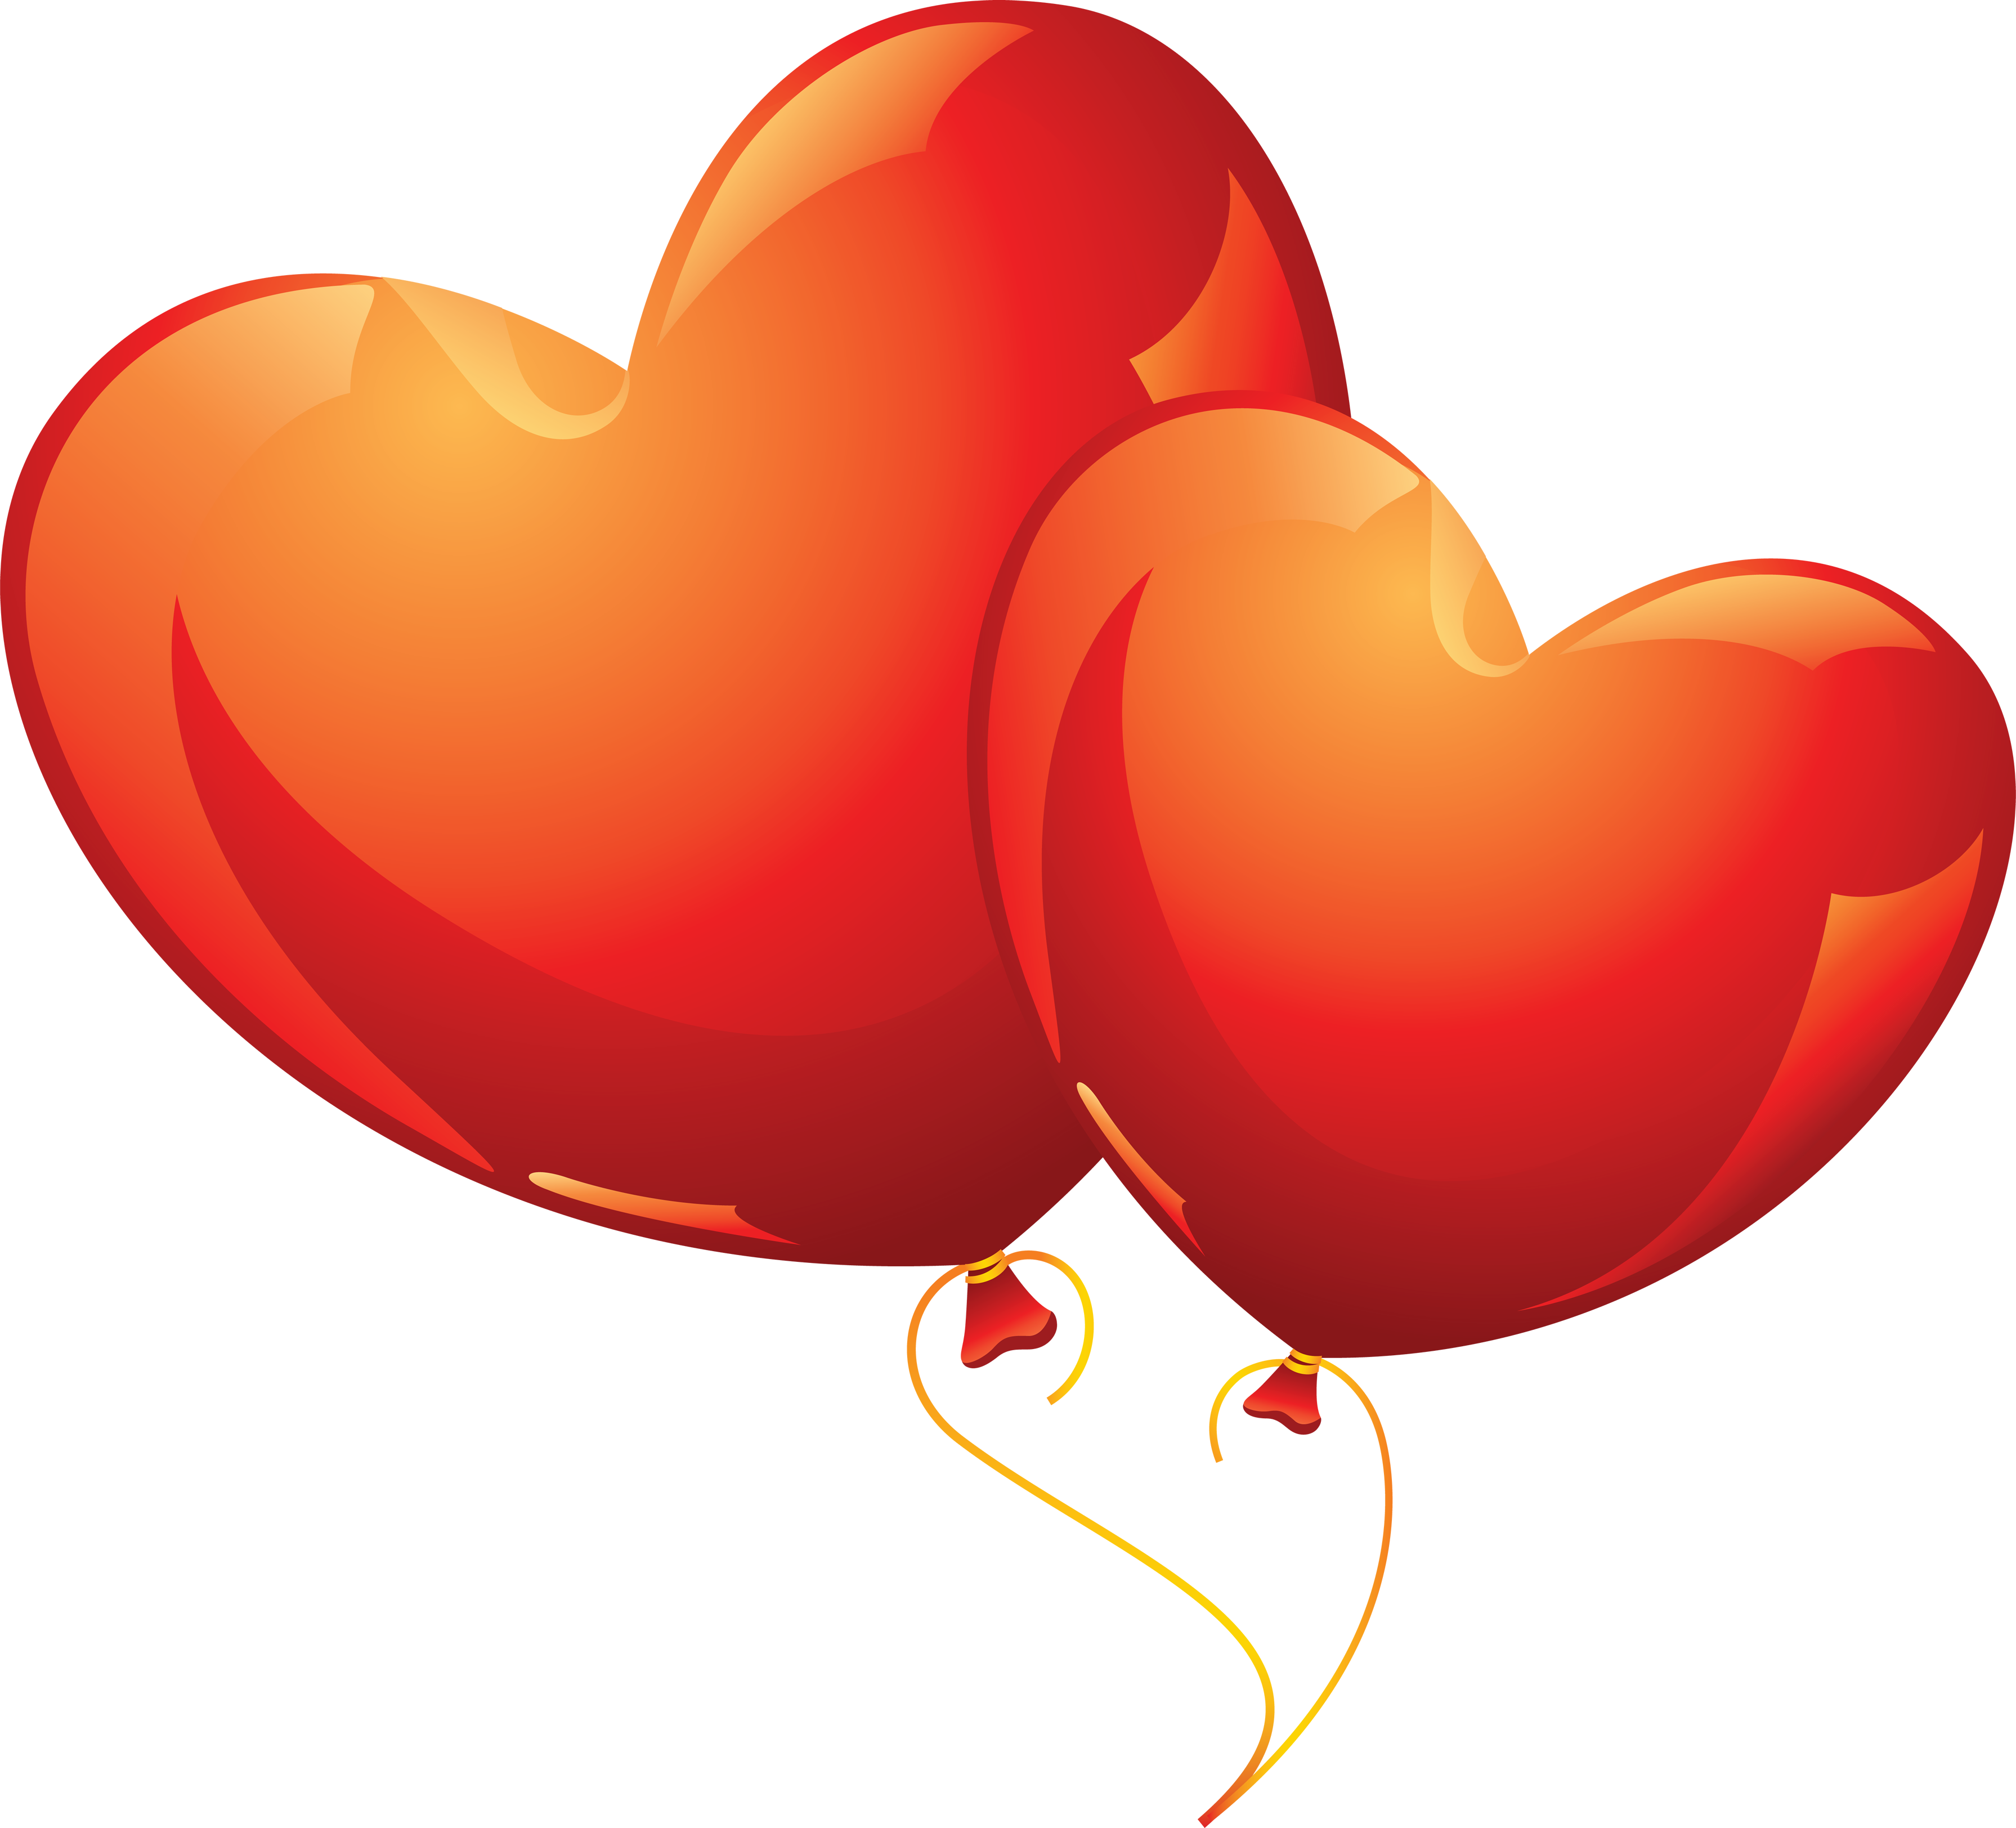 Heart Shaped Love Balloons PNG Image